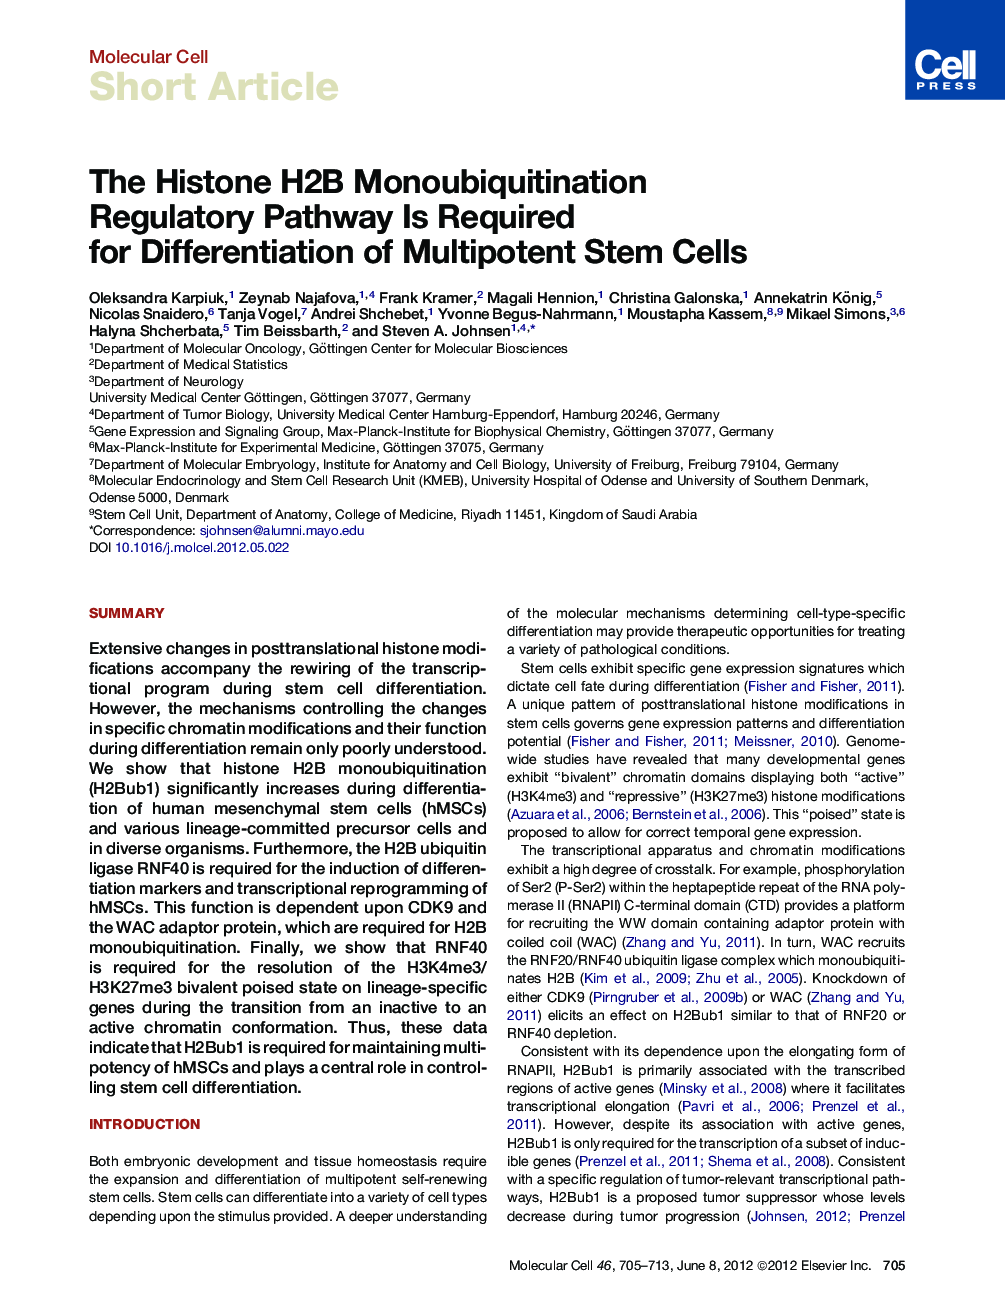 The Histone H2B Monoubiquitination Regulatory Pathway Is Required for Differentiation of Multipotent Stem Cells